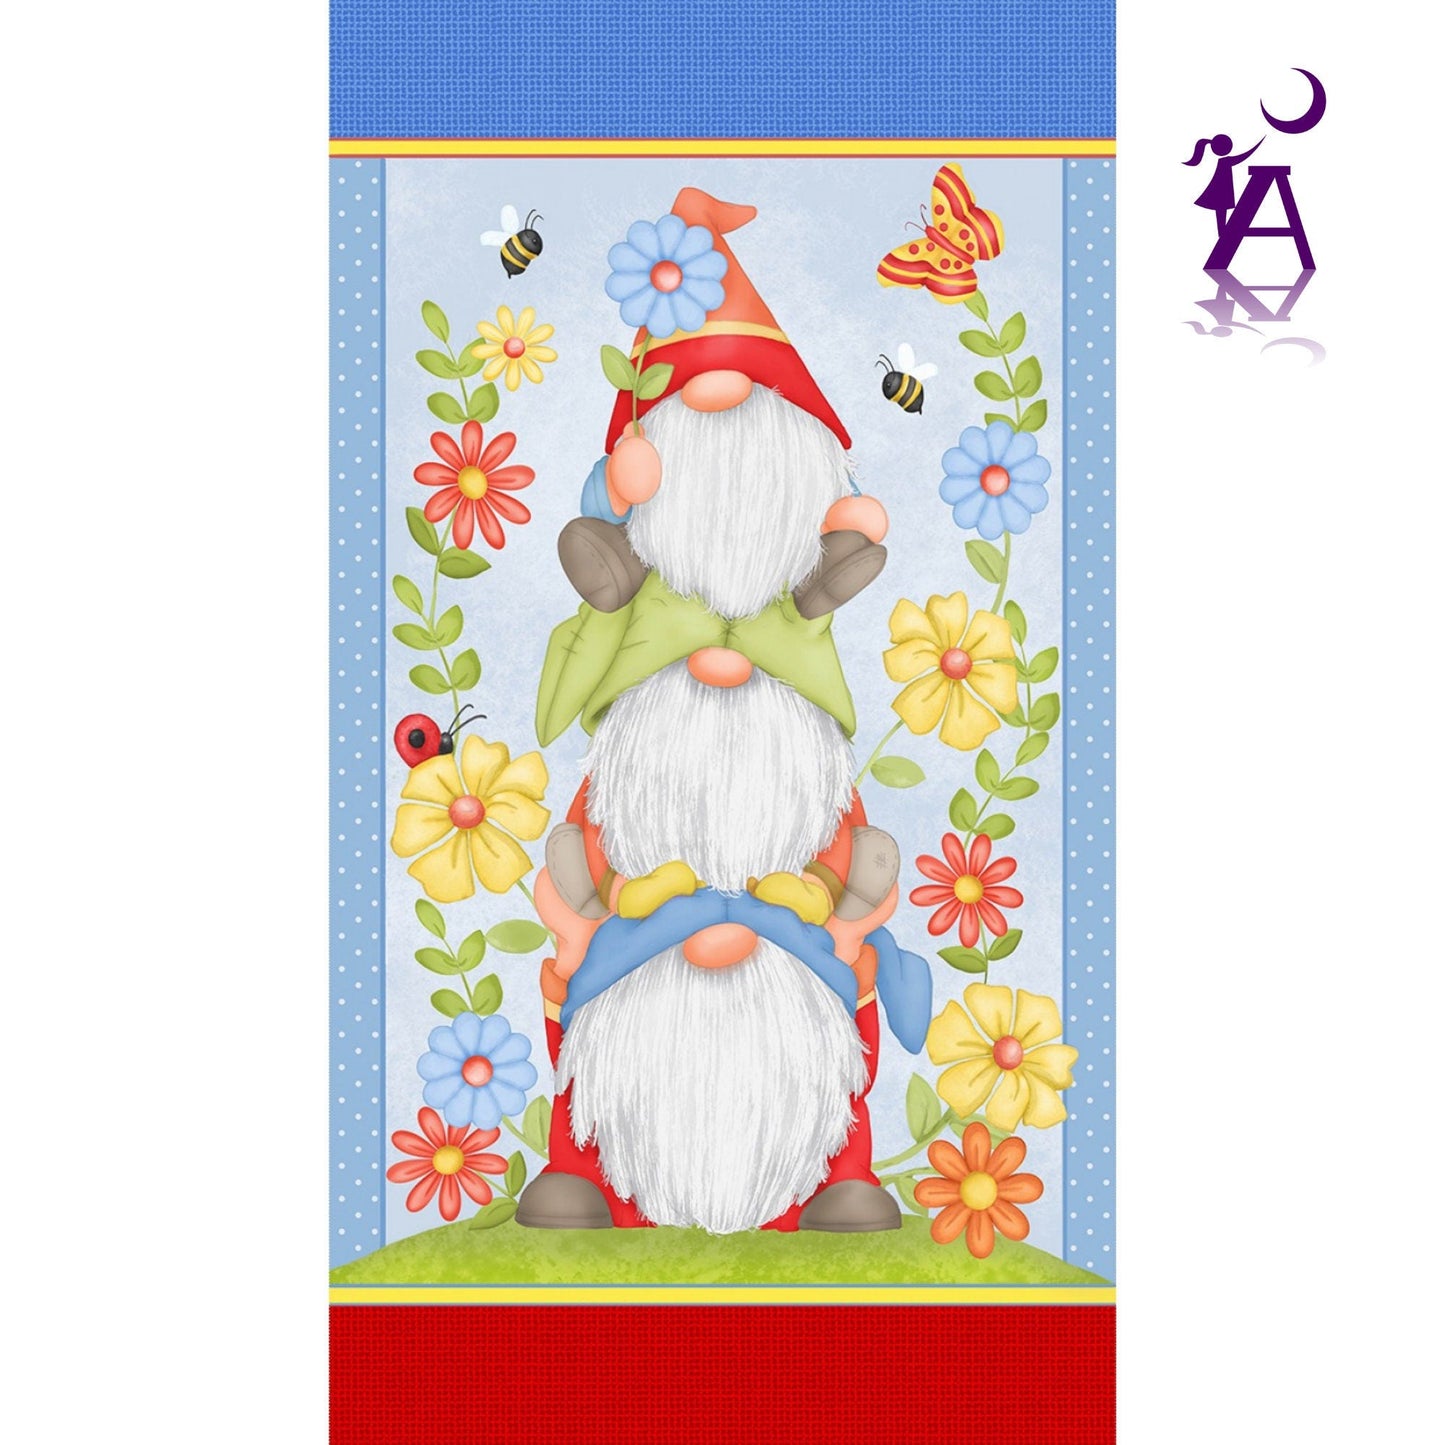 Henry Glass Fabric Gnome Panel / Gnome Panel Gnome is Where Your Garden Grows Ladybug Fabric & Bees Fabric by Henry Glass